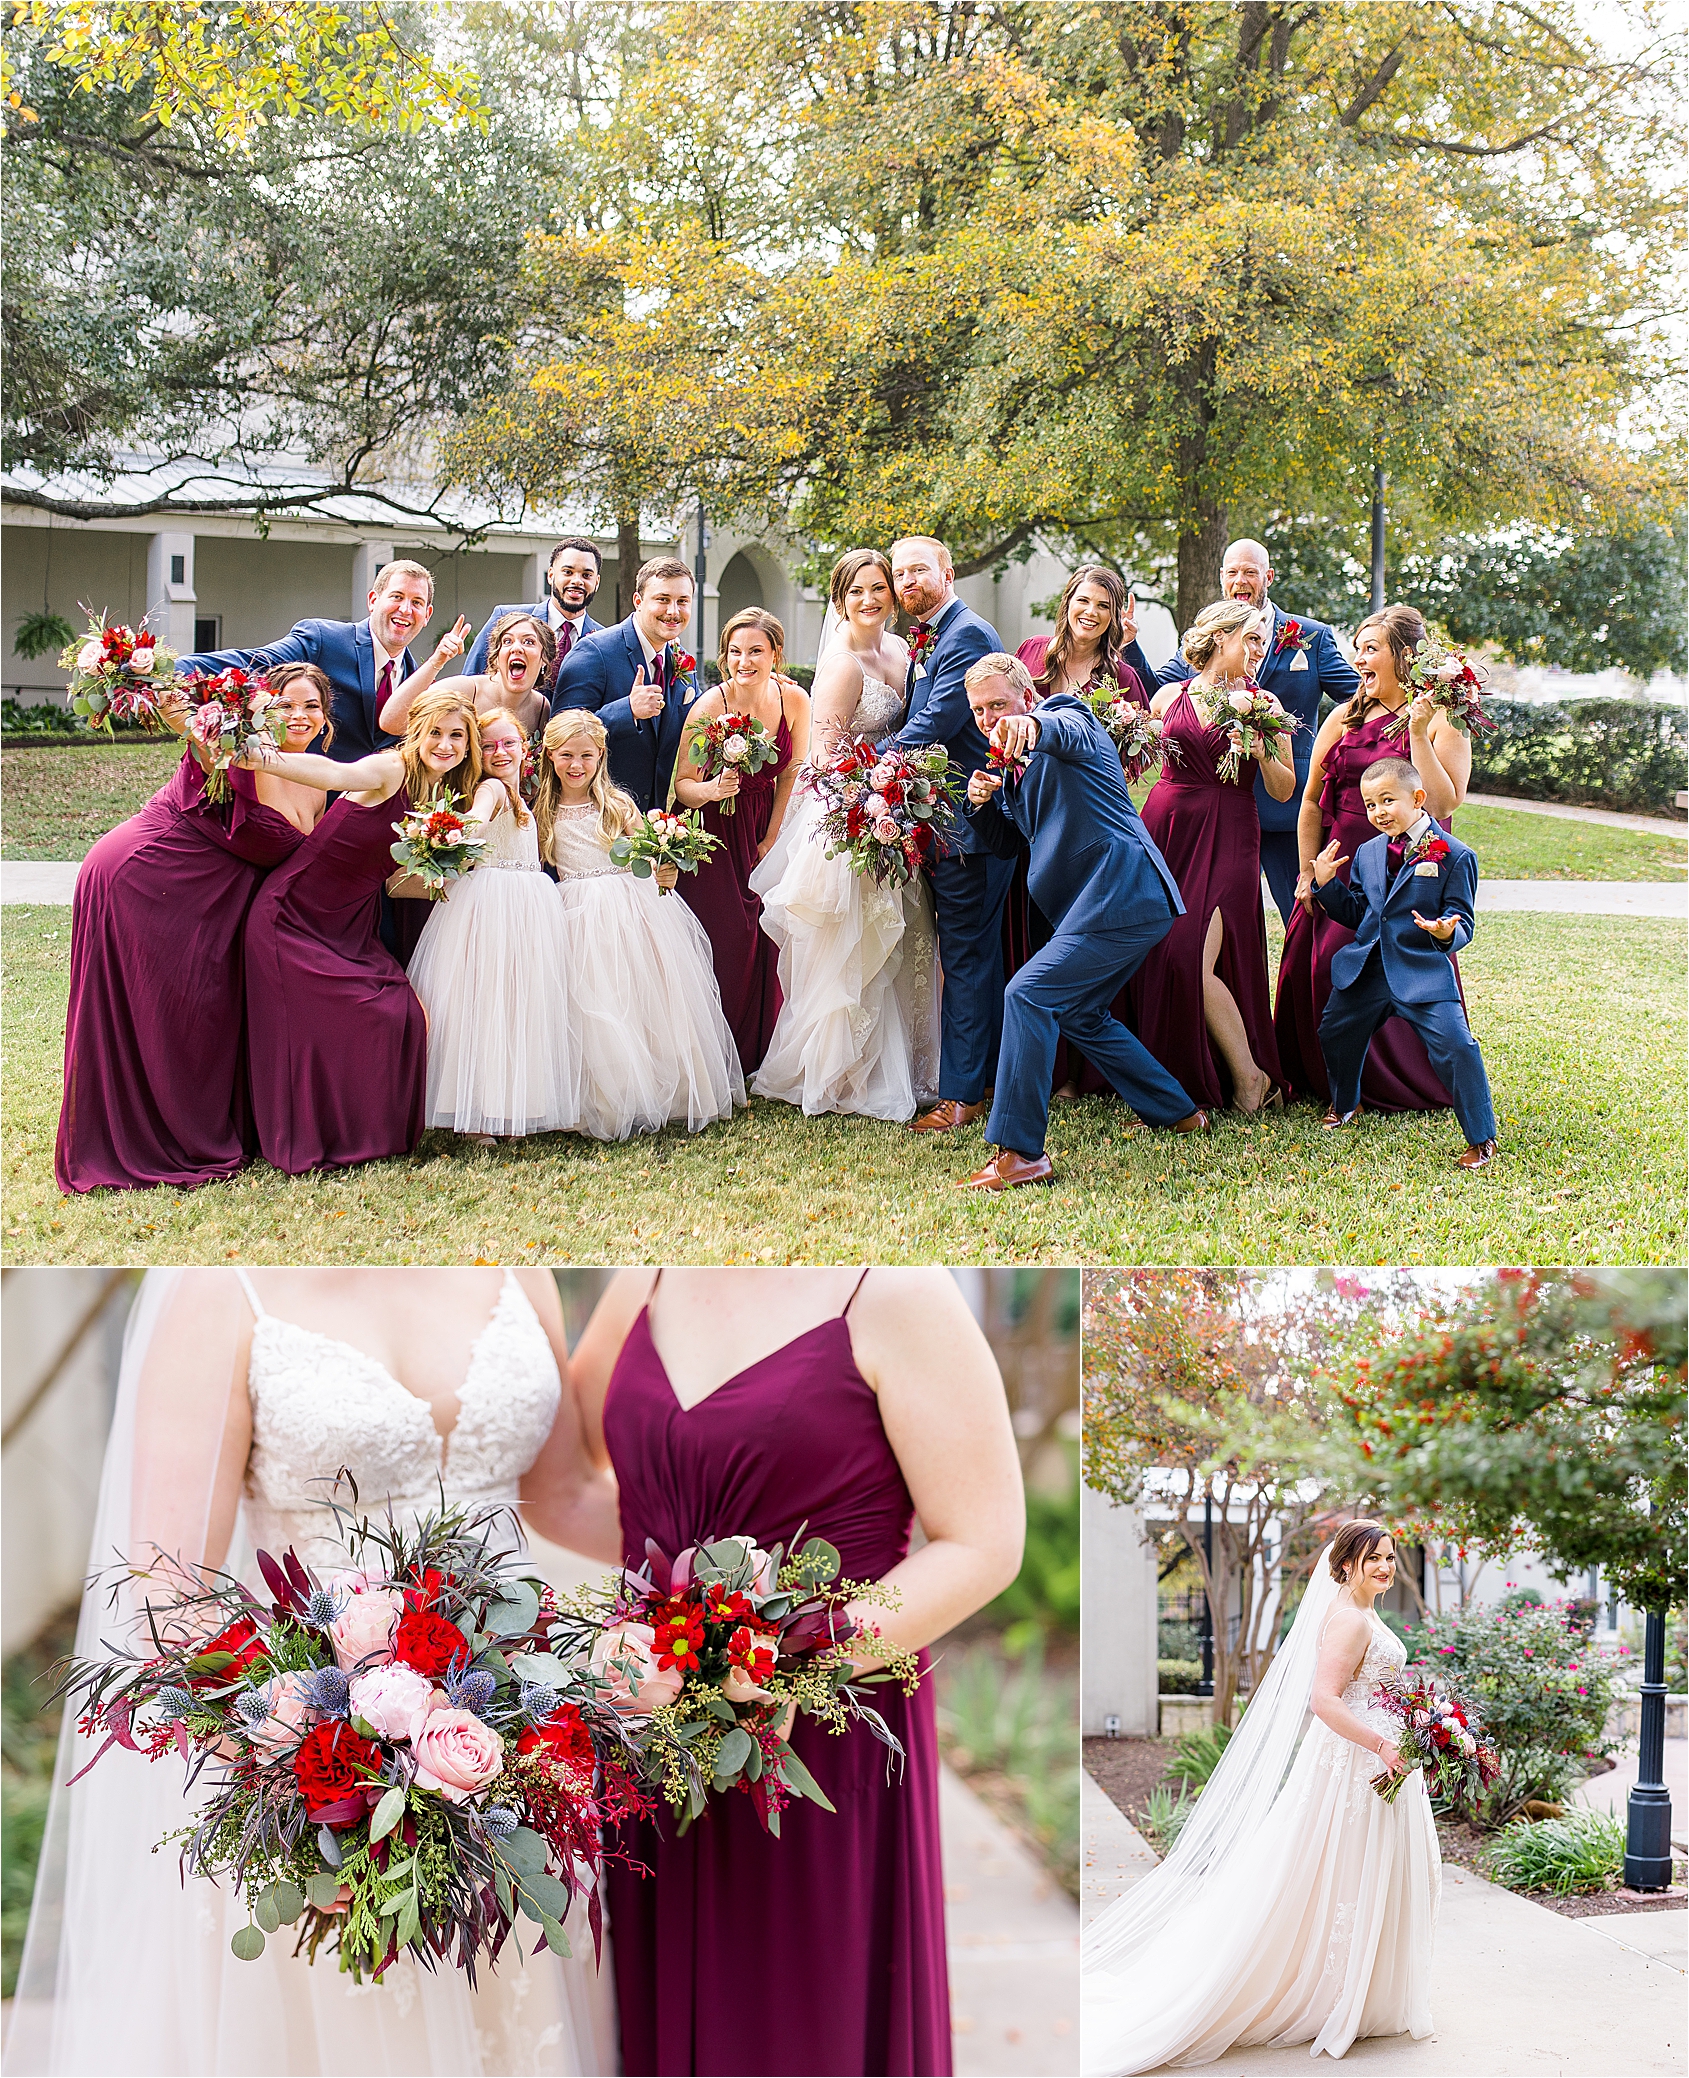 A bridal party shares a fun, large, silly group photos with the girls in maroon dresses and guys in navy suites under lots of greenery at Alamo Heights United Methodist Church in San Antonio, Texas. 